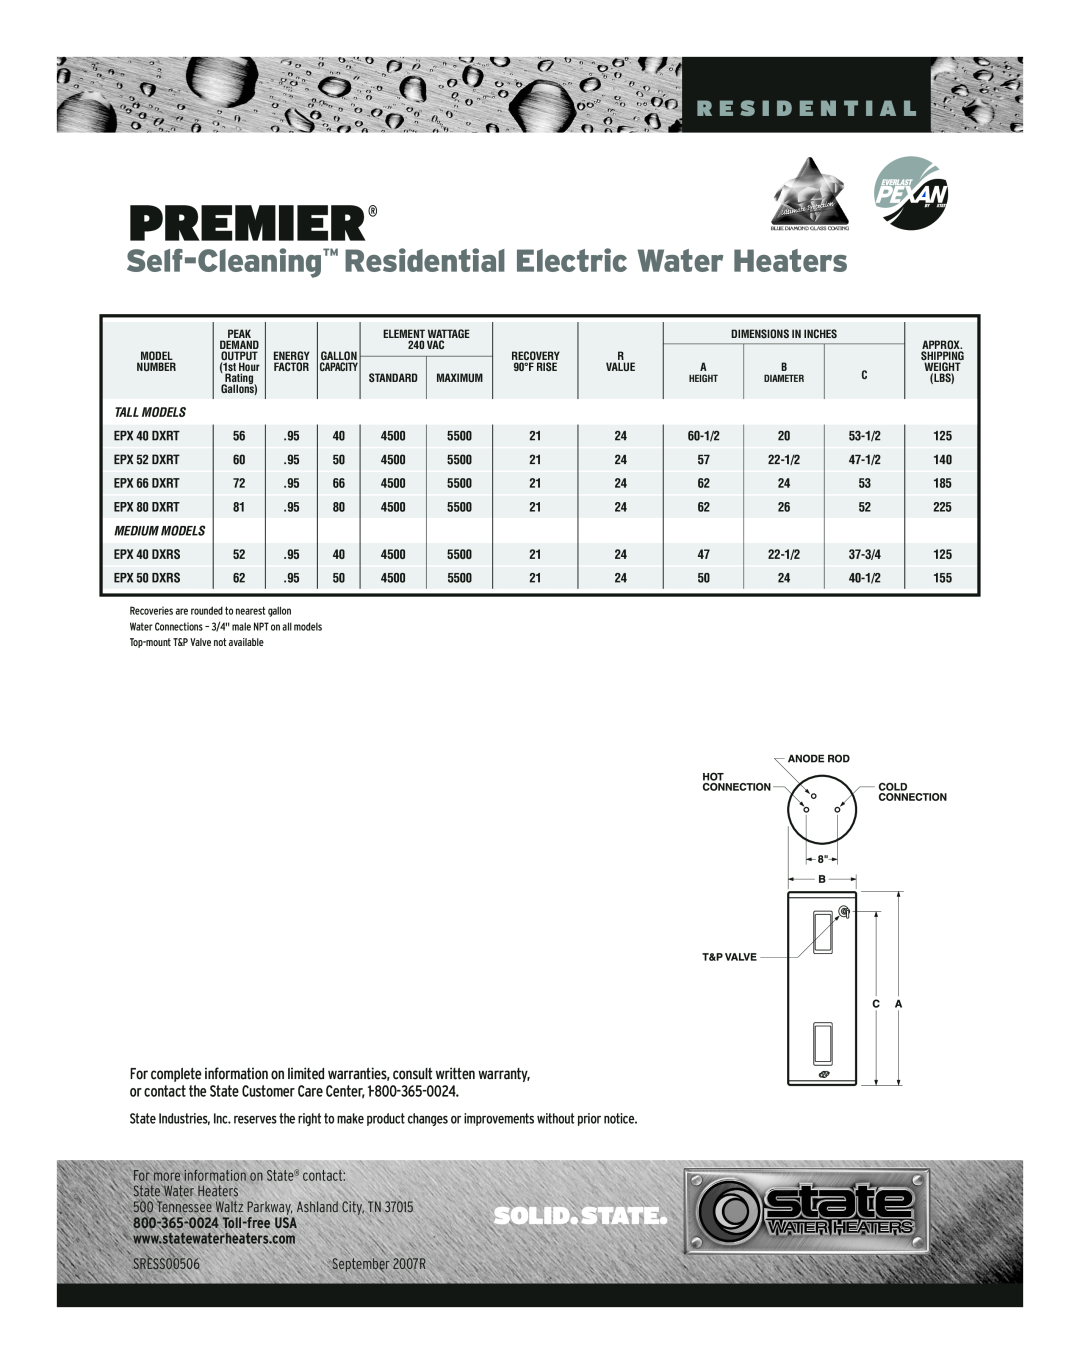 State Industries Premier, Self-Cleaning Residential Electric Water Heaters, R E S I D E N T I A L, SRESS00506 